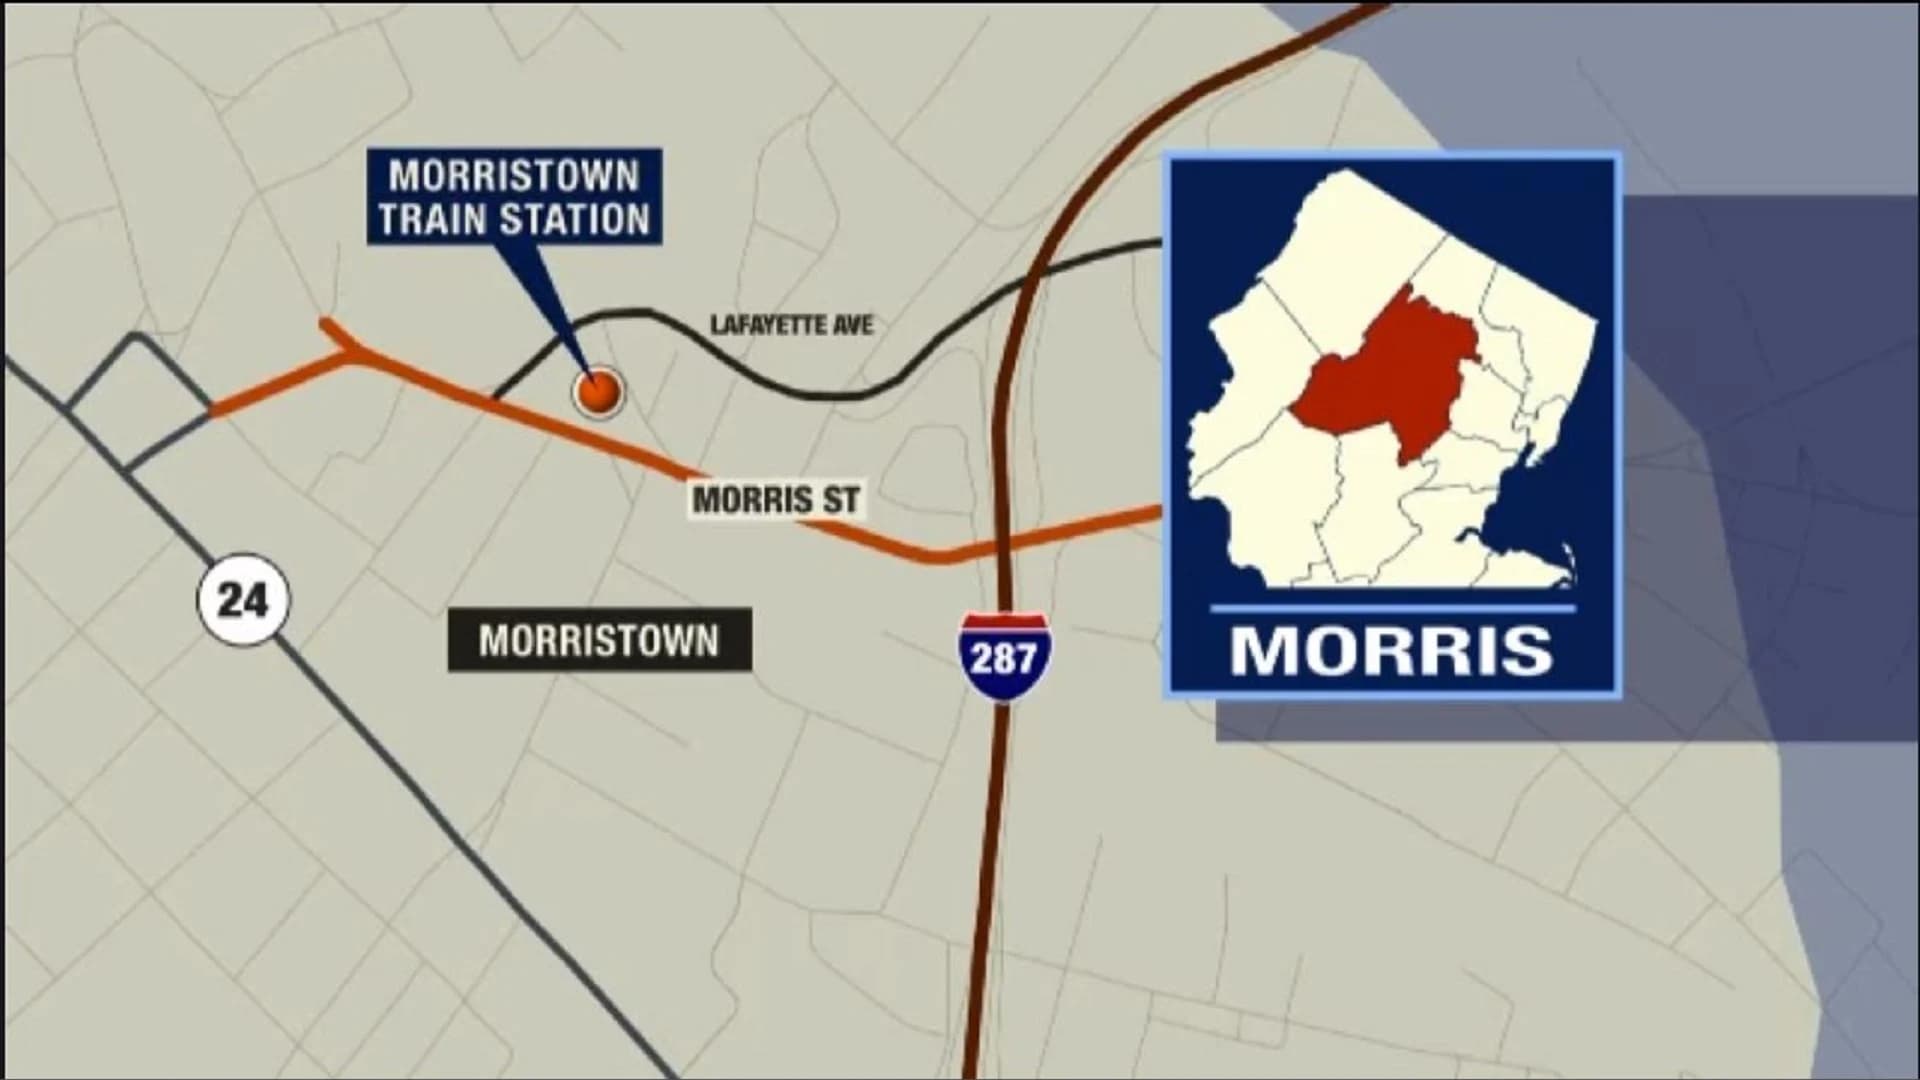 Prosecutor’s office: Body of man found on stairway at New Jersey train station